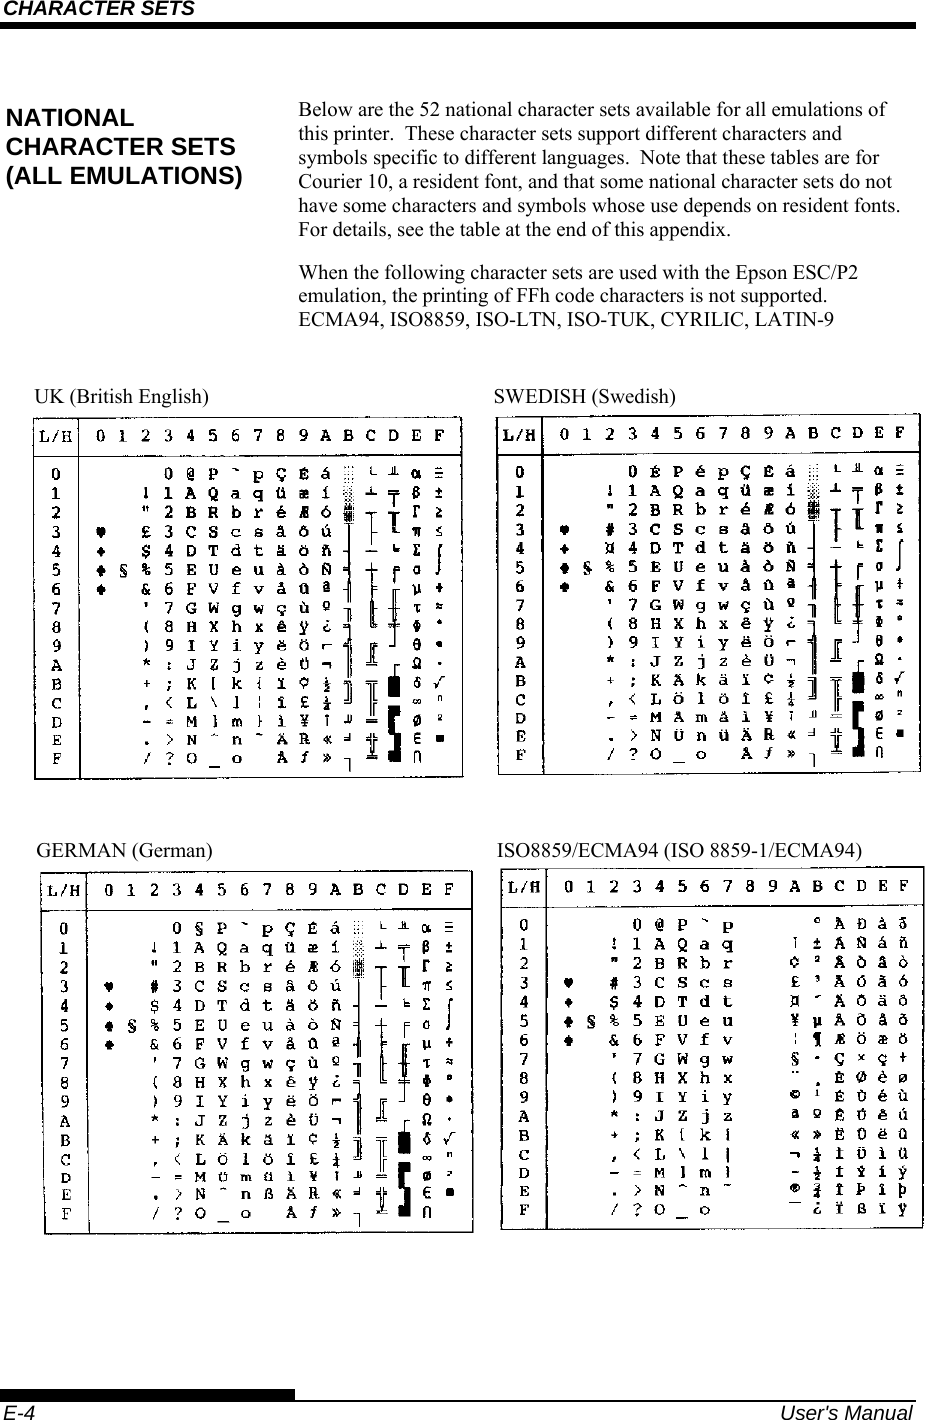 CHARACTER SETS    E-4  User&apos;s Manual Below are the 52 national character sets available for all emulations of this printer.  These character sets support different characters and symbols specific to different languages.  Note that these tables are for Courier 10, a resident font, and that some national character sets do not have some characters and symbols whose use depends on resident fonts.  For details, see the table at the end of this appendix. When the following character sets are used with the Epson ESC/P2 emulation, the printing of FFh code characters is not supported. ECMA94, ISO8859, ISO-LTN, ISO-TUK, CYRILIC, LATIN-9   NATIONAL CHARACTER SETS (ALL EMULATIONS) UK (British English)  SWEDISH (Swedish)  GERMAN (German)  ISO8859/ECMA94 (ISO 8859-1/ECMA94)  